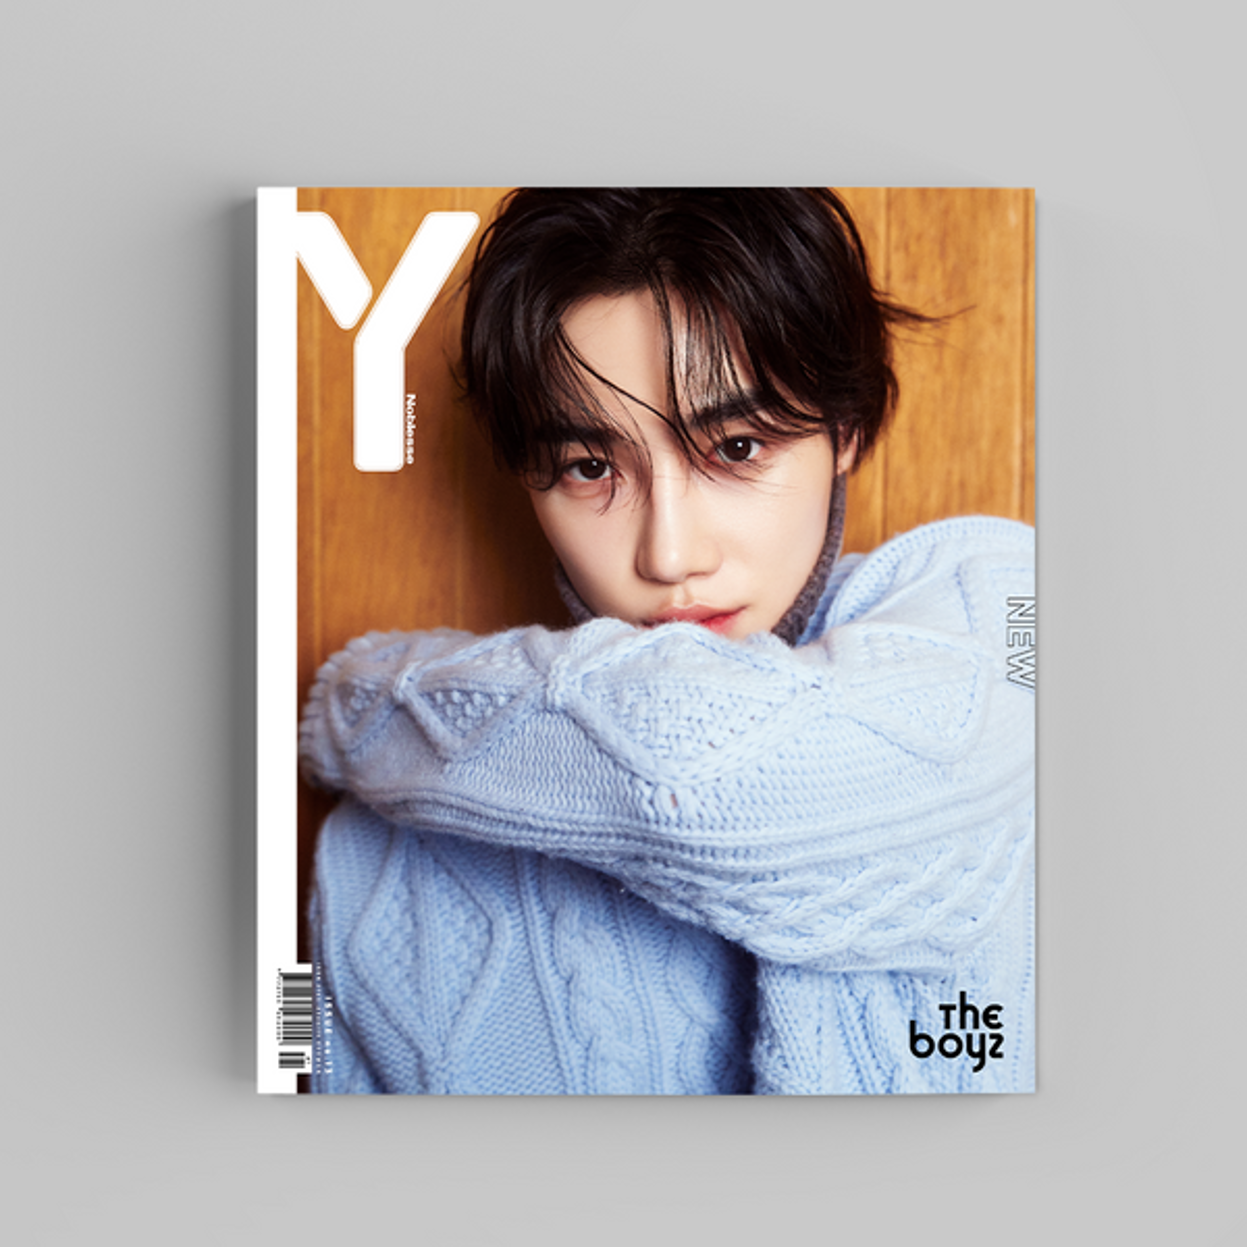 Y magazine Issue No. 13 Spring Issue type A (cover: THE BOYZ: NEW / Main article: EVNNE, THE BOYZ 18p)